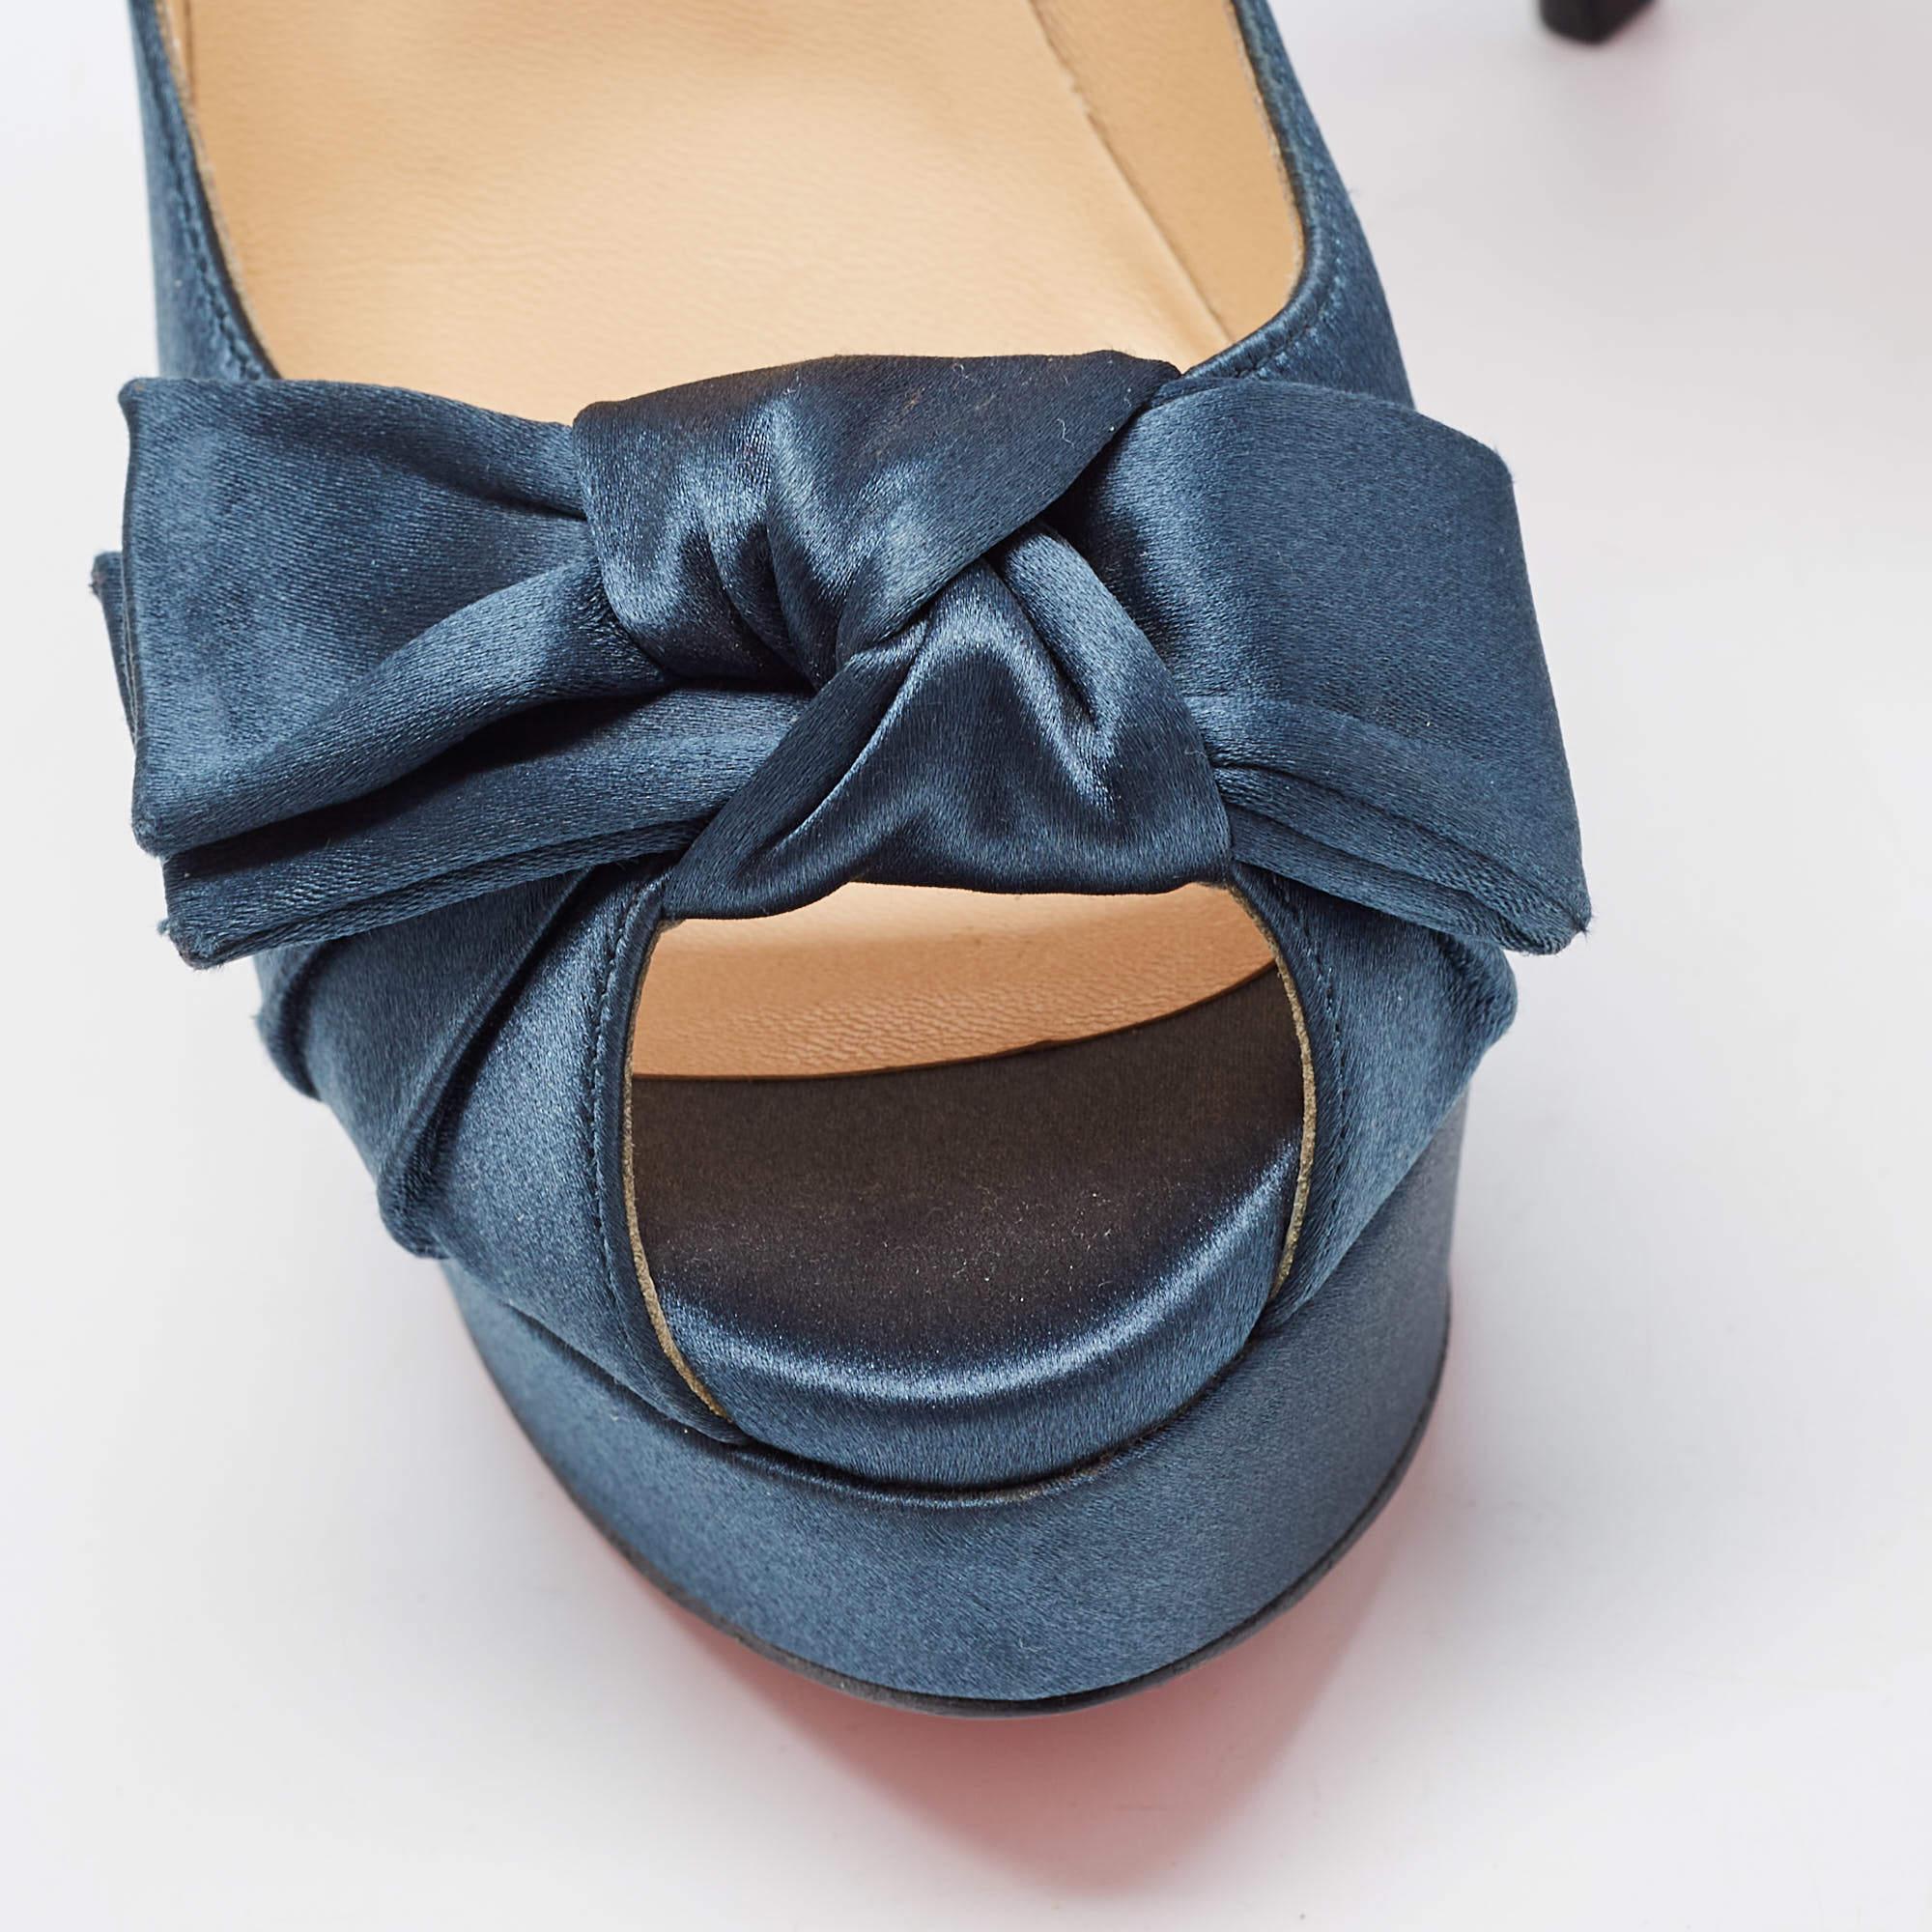 Christian Louboutin Teal Satin Madame Butterfly Pumps Size 37 For Sale 2